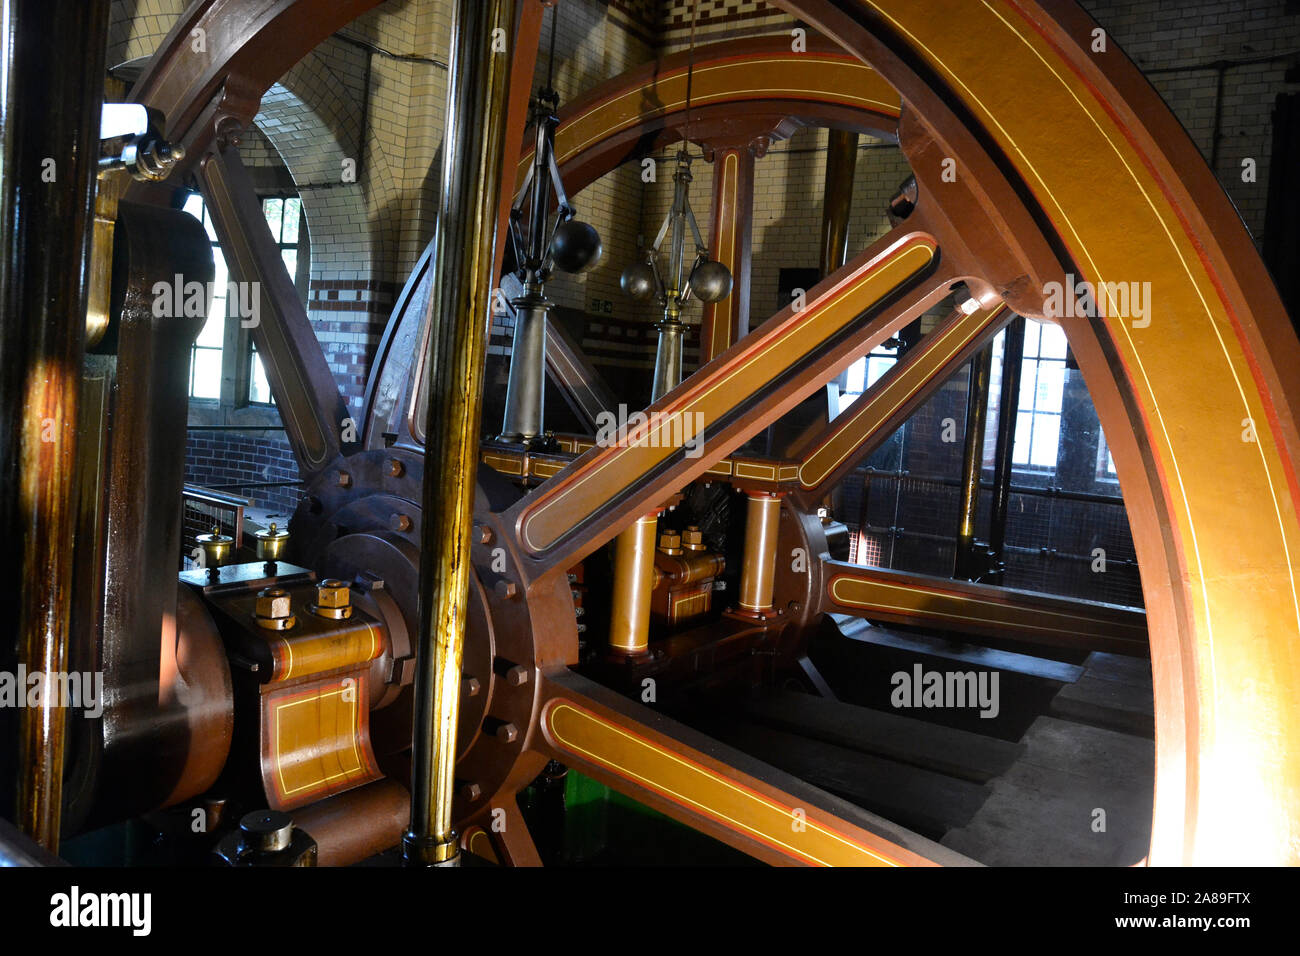 Beam engines in operation at Abbey Pumping Station in Leicester, Leicestershire, UK Stock Photo